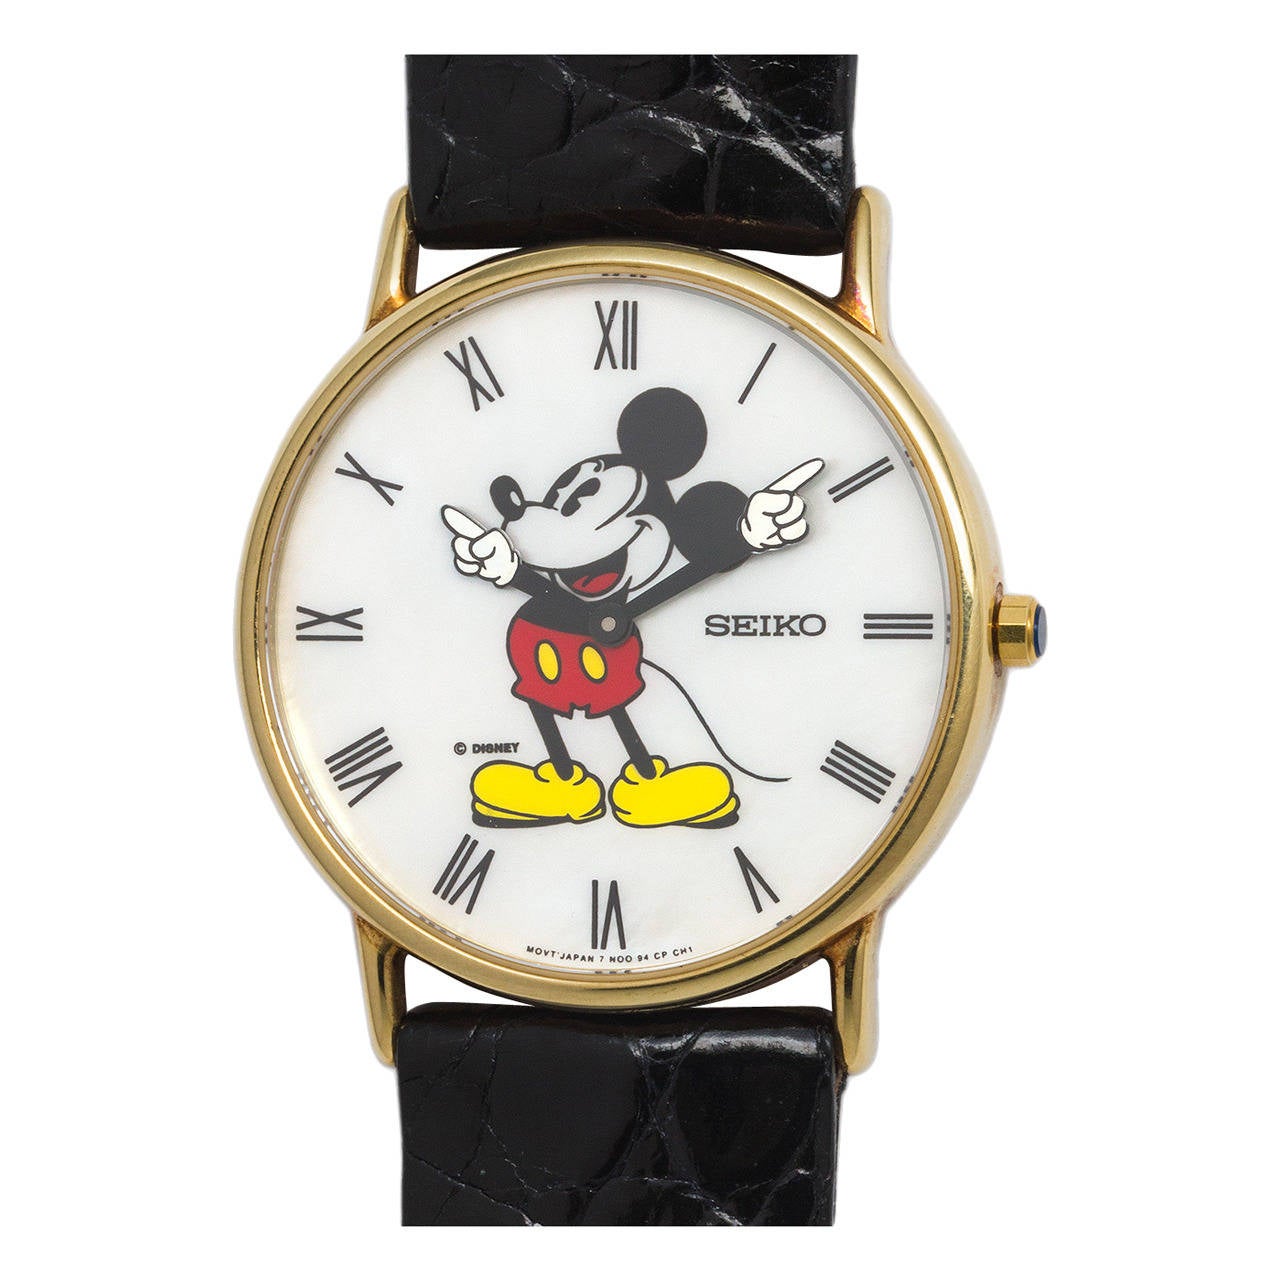 Seiko Yellow Gold Limited Edition Mickey Mouse Wristwatch circa 1980s